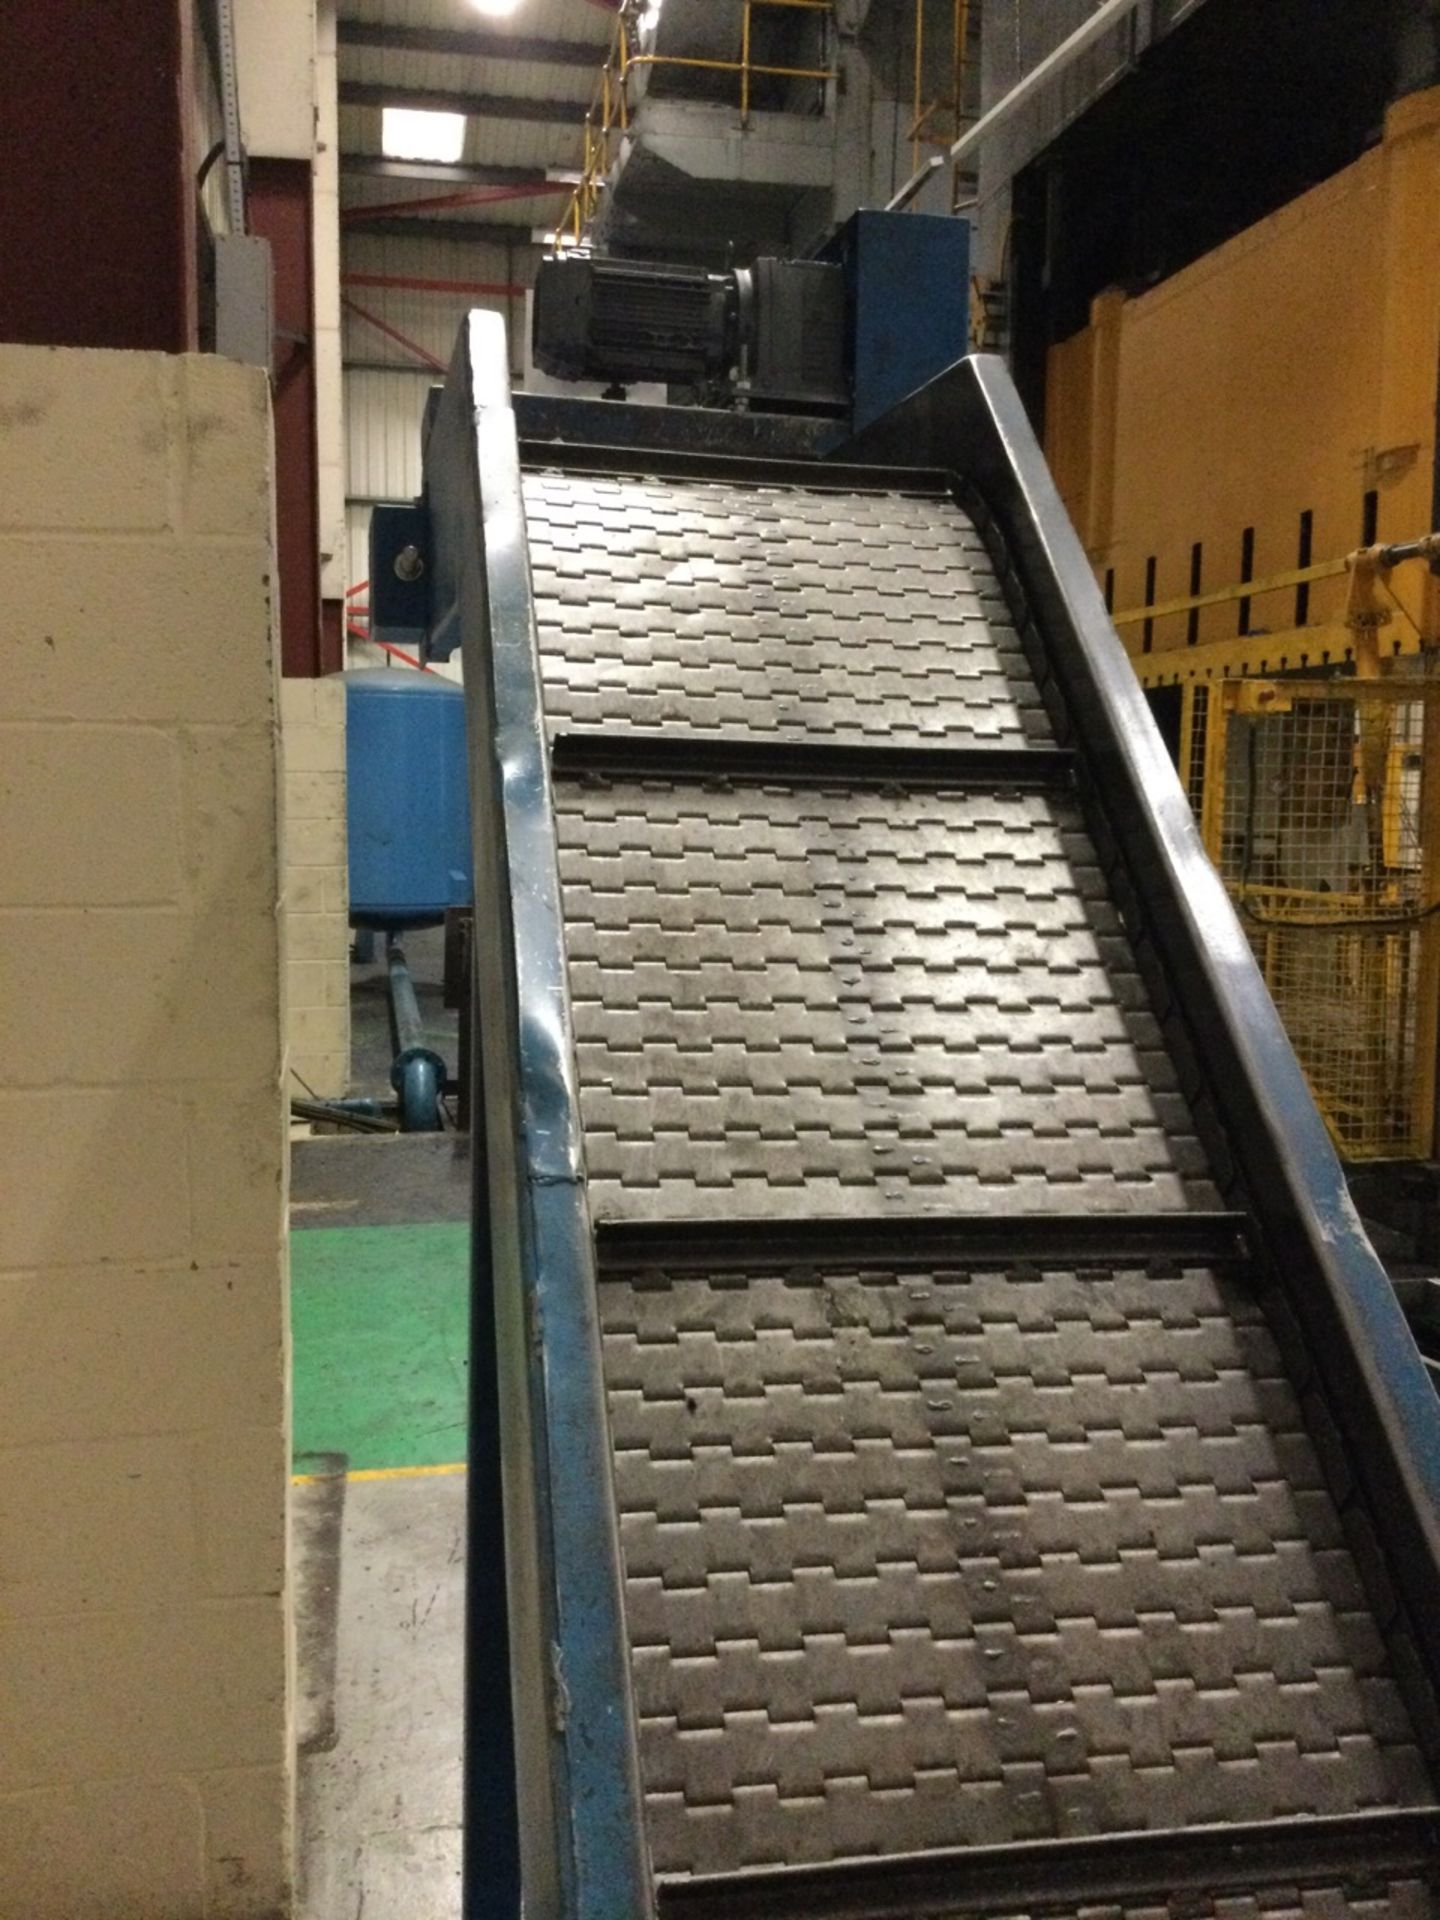 1, Inclined Parts Conveyor, 46 X 430 Cm Approx., With Steel Belt - Image 3 of 3